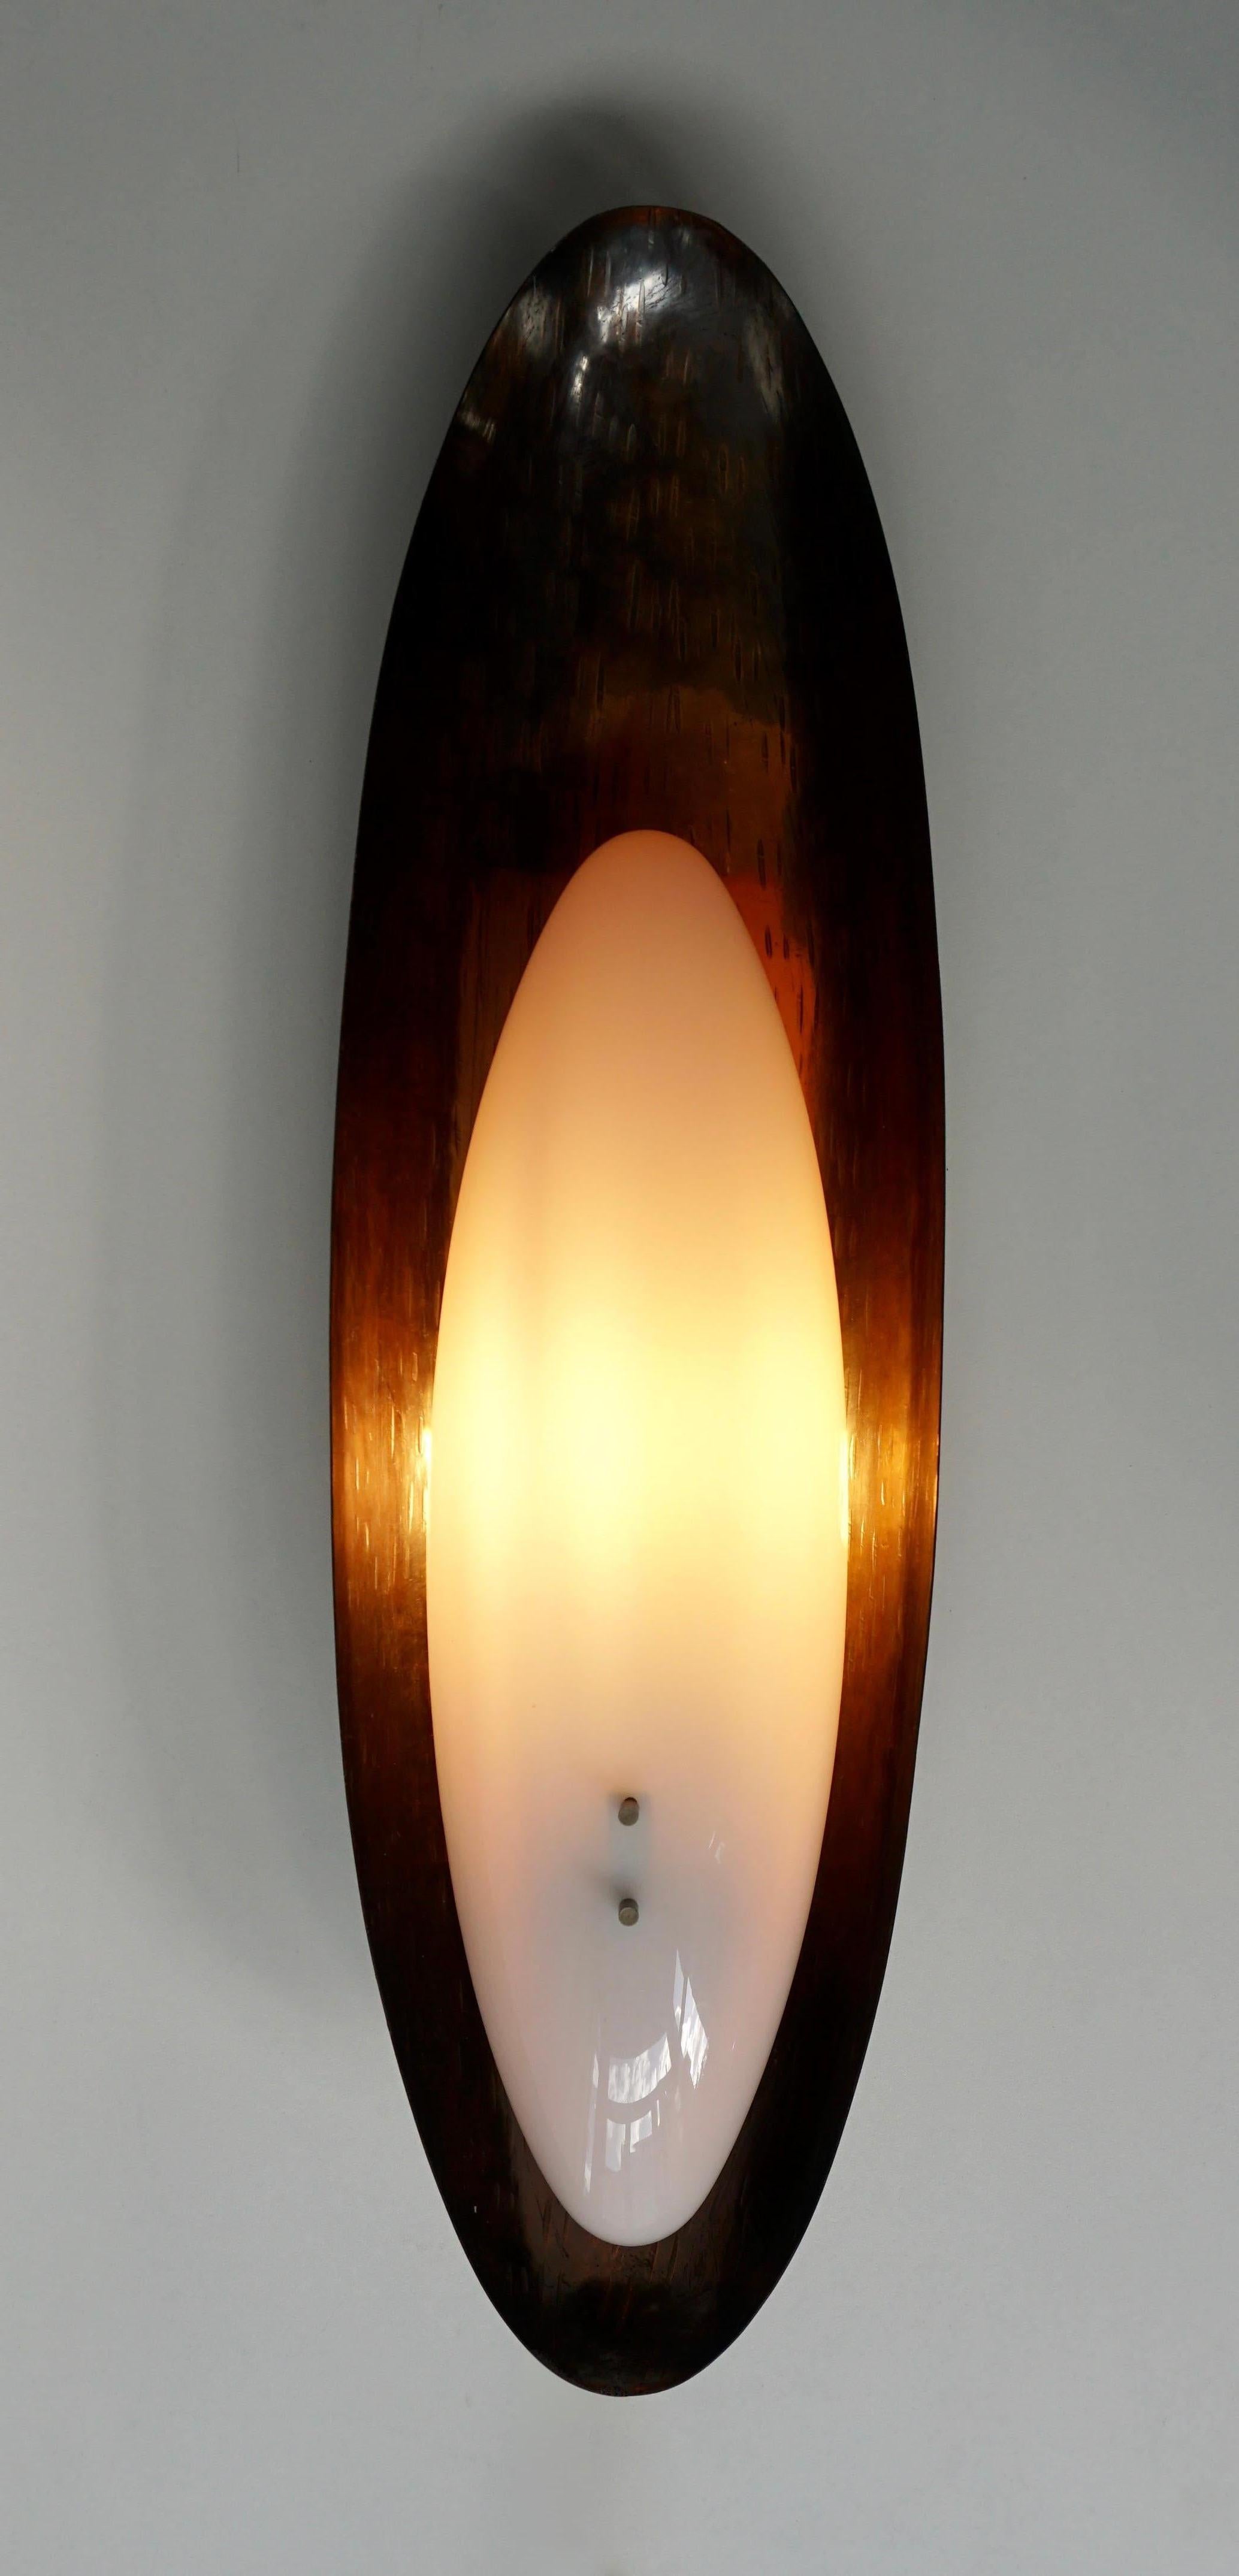 One Hammered Copper Sconce by Reggiani 1